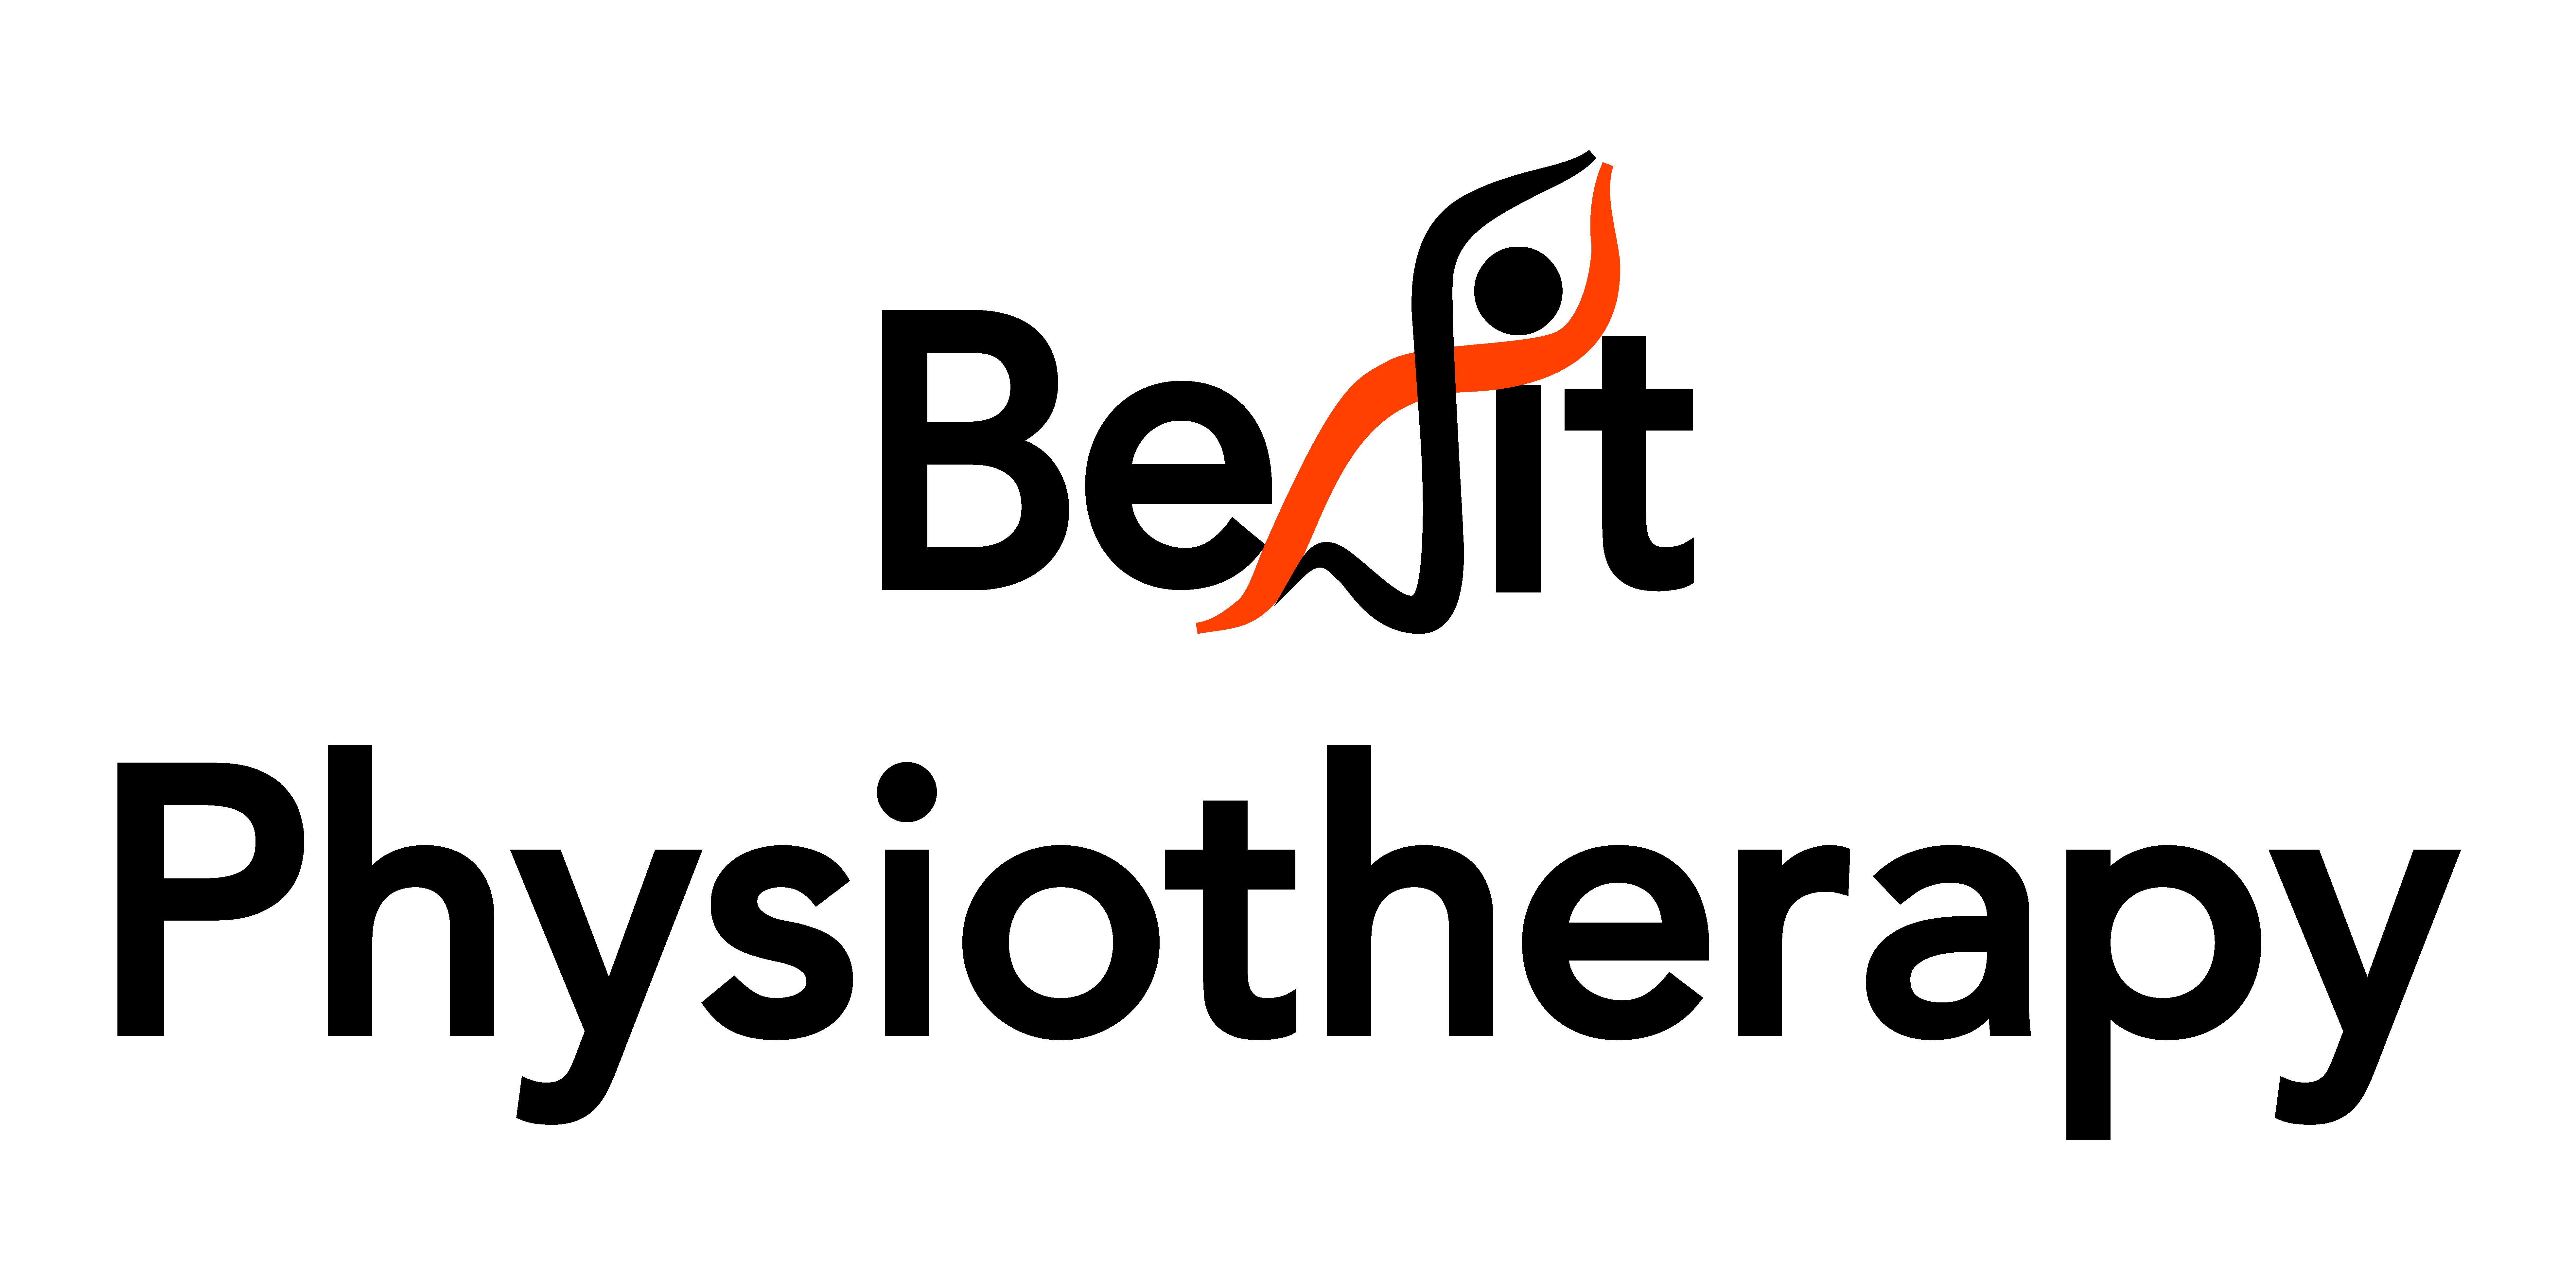 Befit- Signage #1 – Befit Physiotherapy